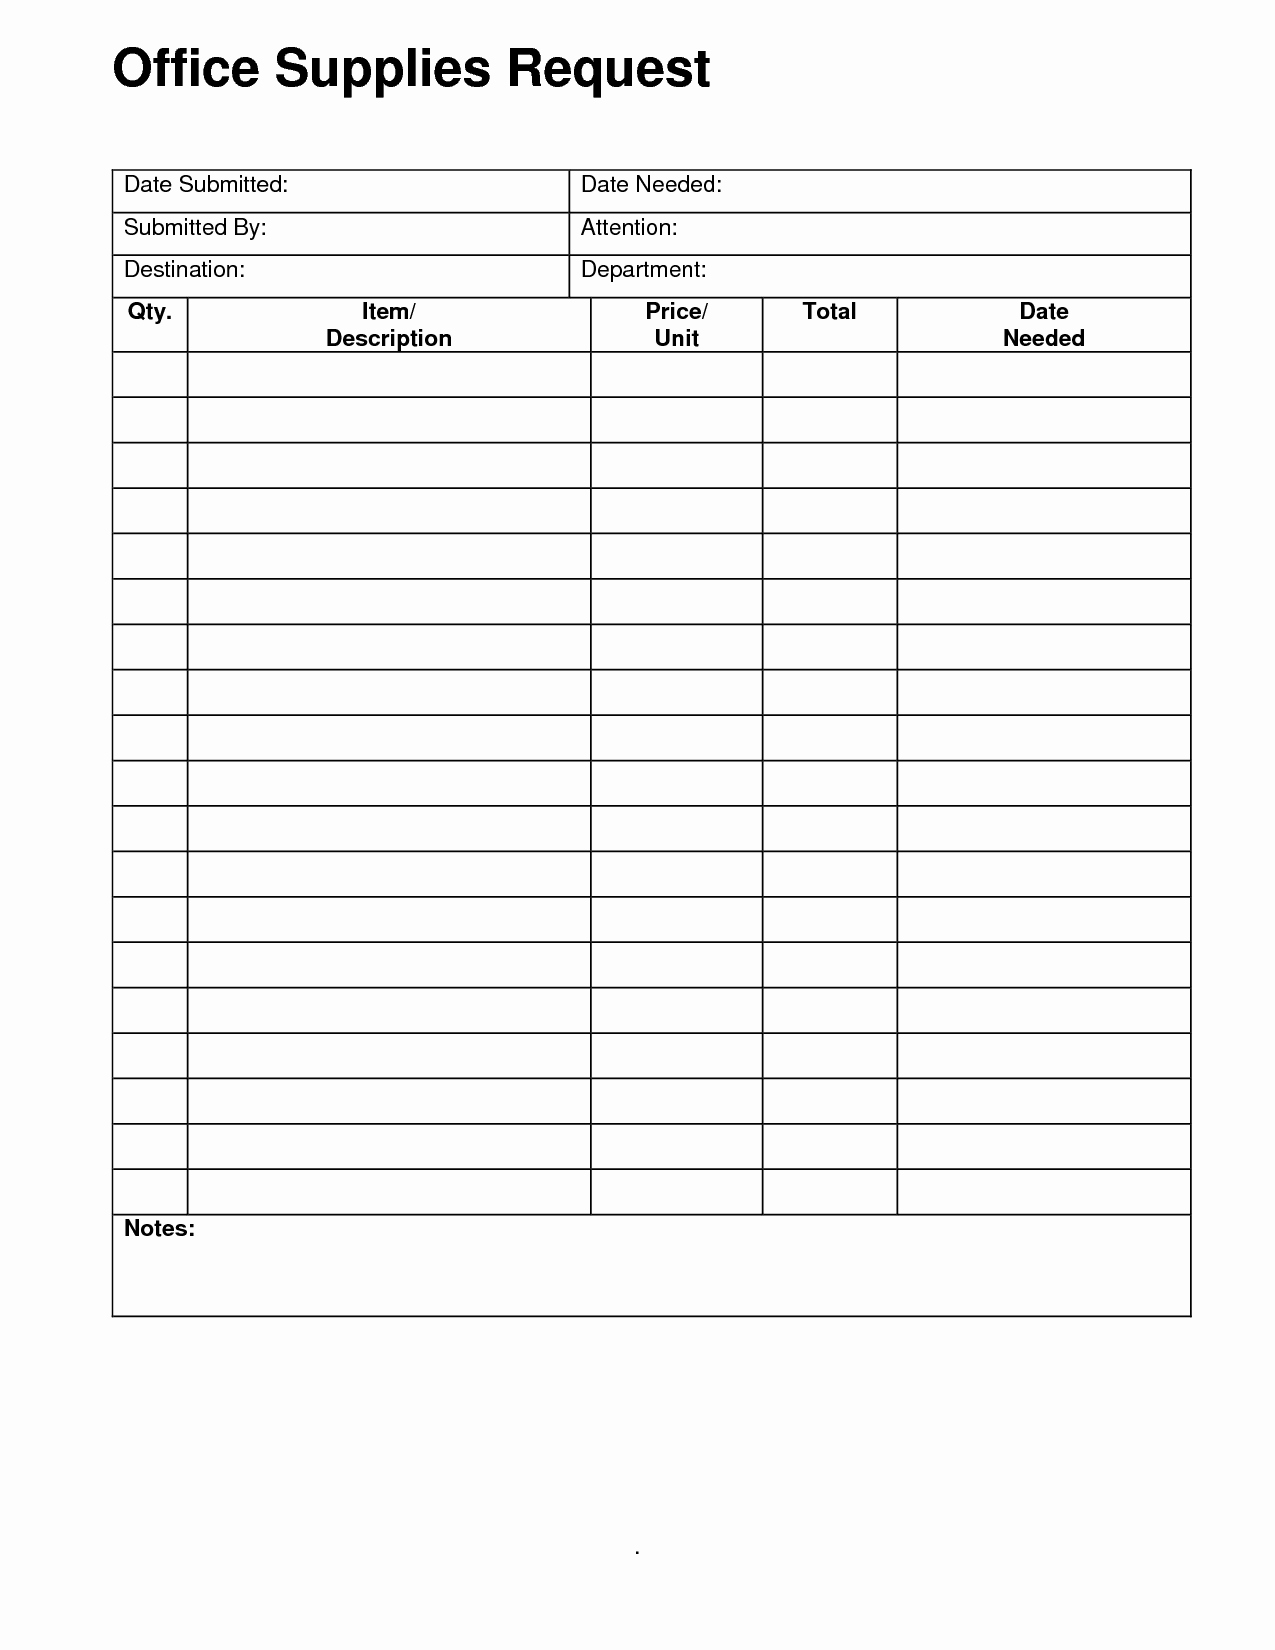 Supply order form Template Lovely Fice Supply Checklist Templates for Your Business Violeet